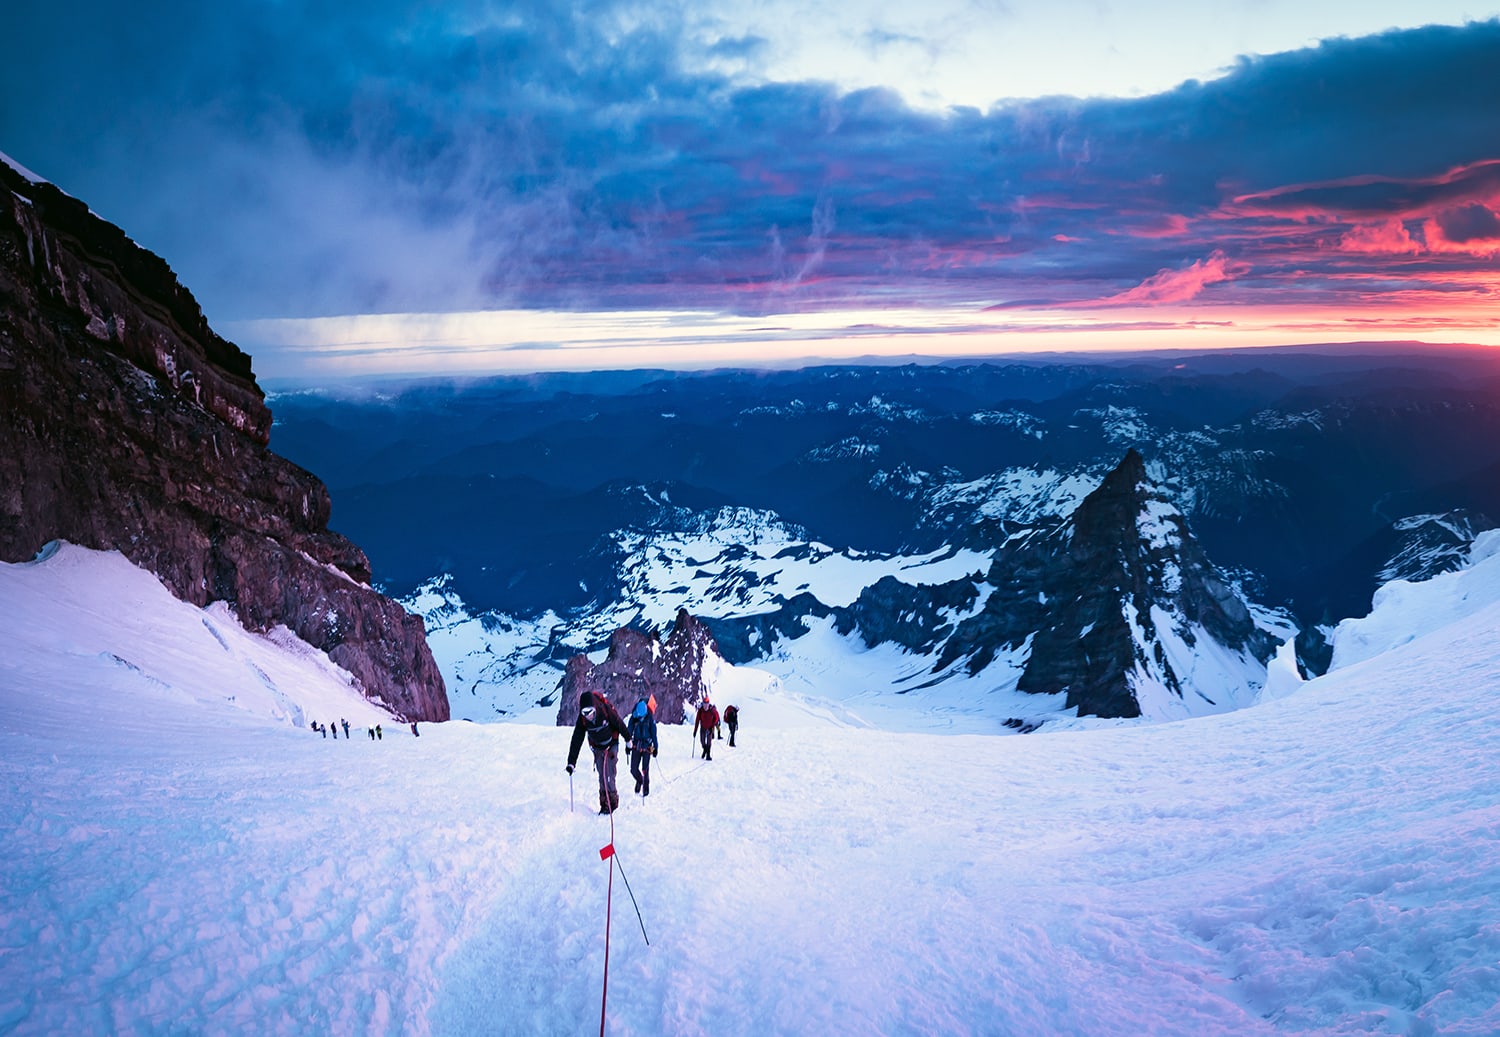 Early morning sunrise as climbers attempt to summit Mt Rainier in Washington